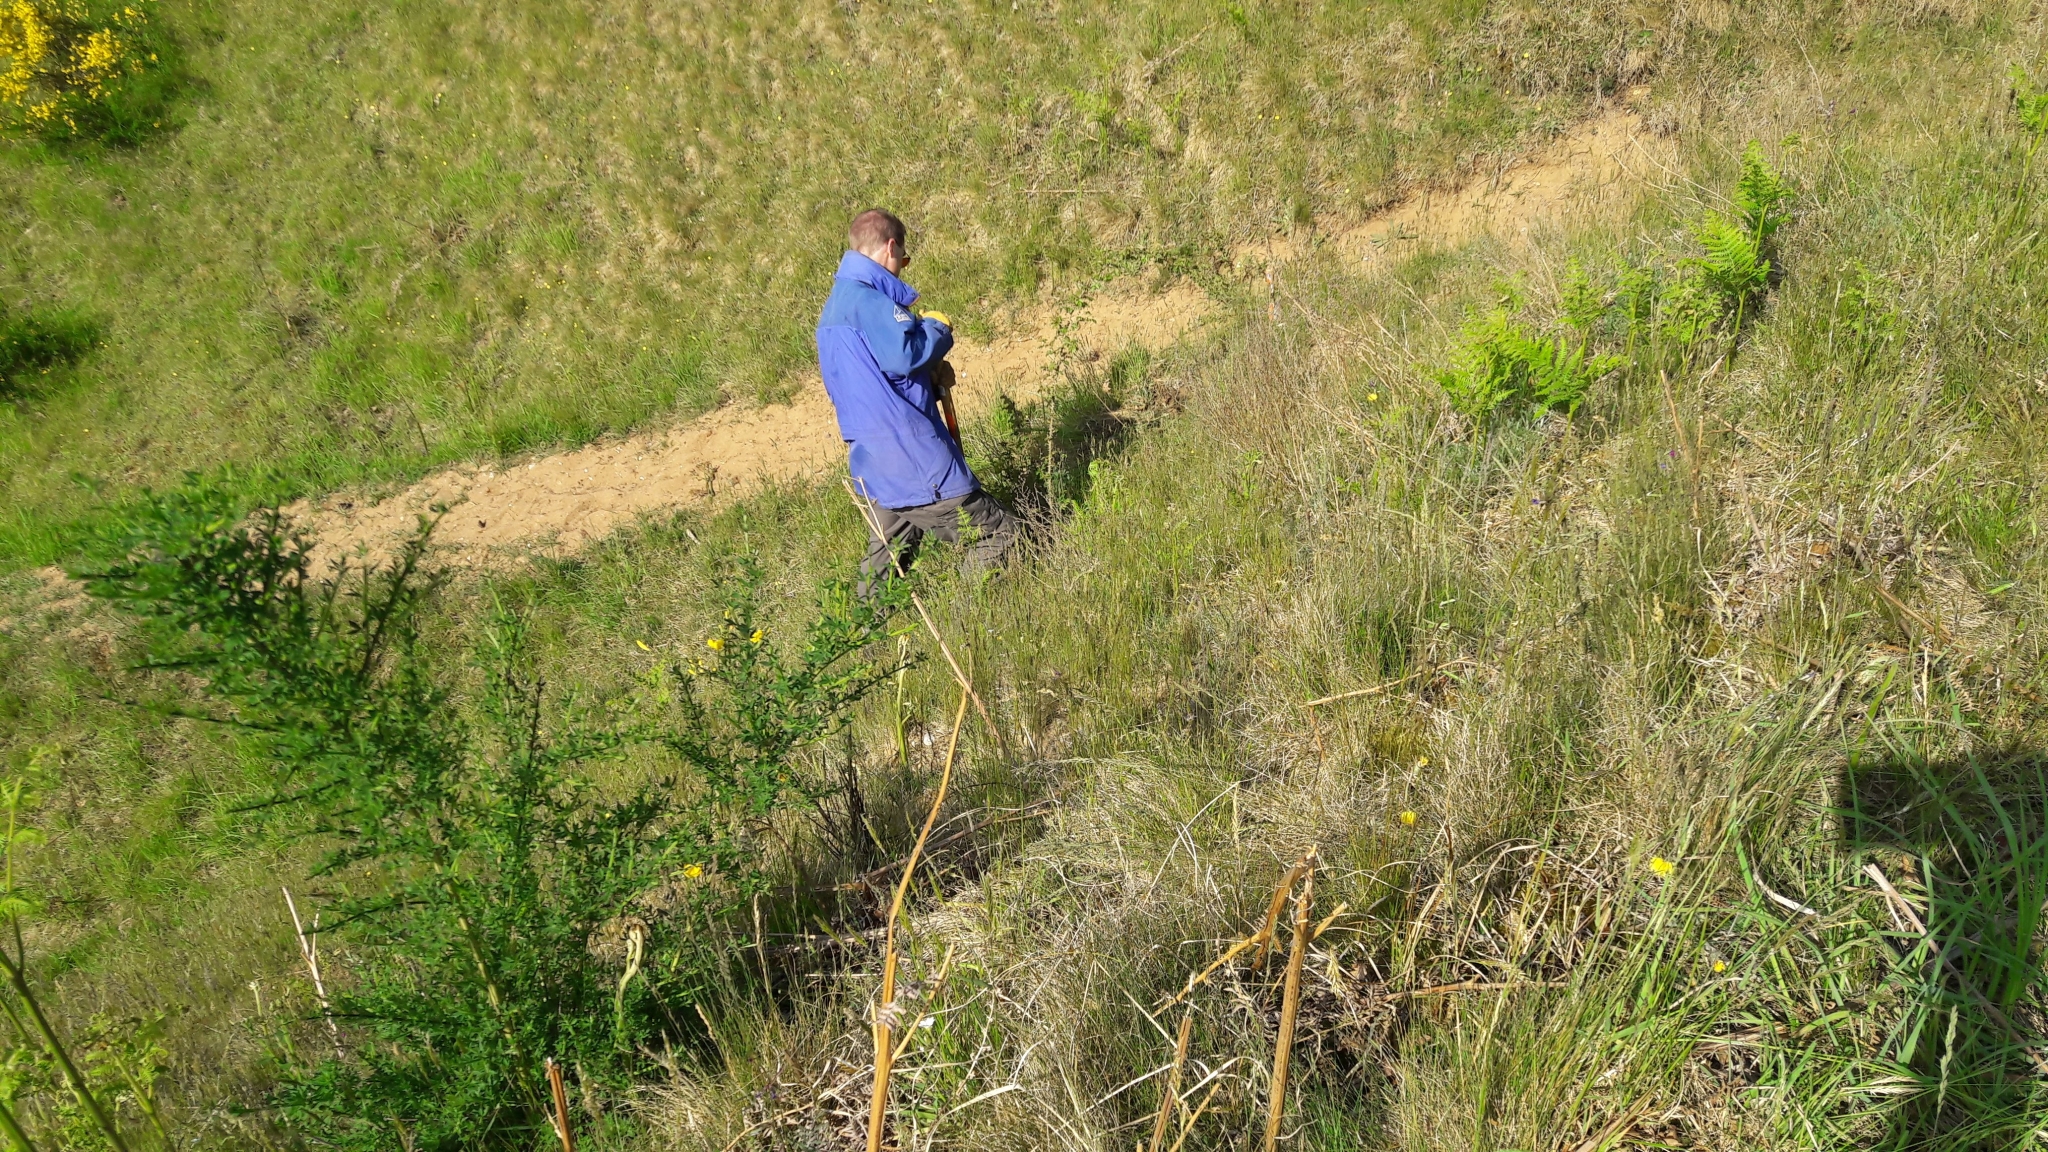 A photo from the FoTF Conservation Event - May 2018 - Open Day preparations at Mildenhall Mugwort Pits & Mildenhall Warren Lodge : A volunteer works on one of the slopes of the Mugworts pits